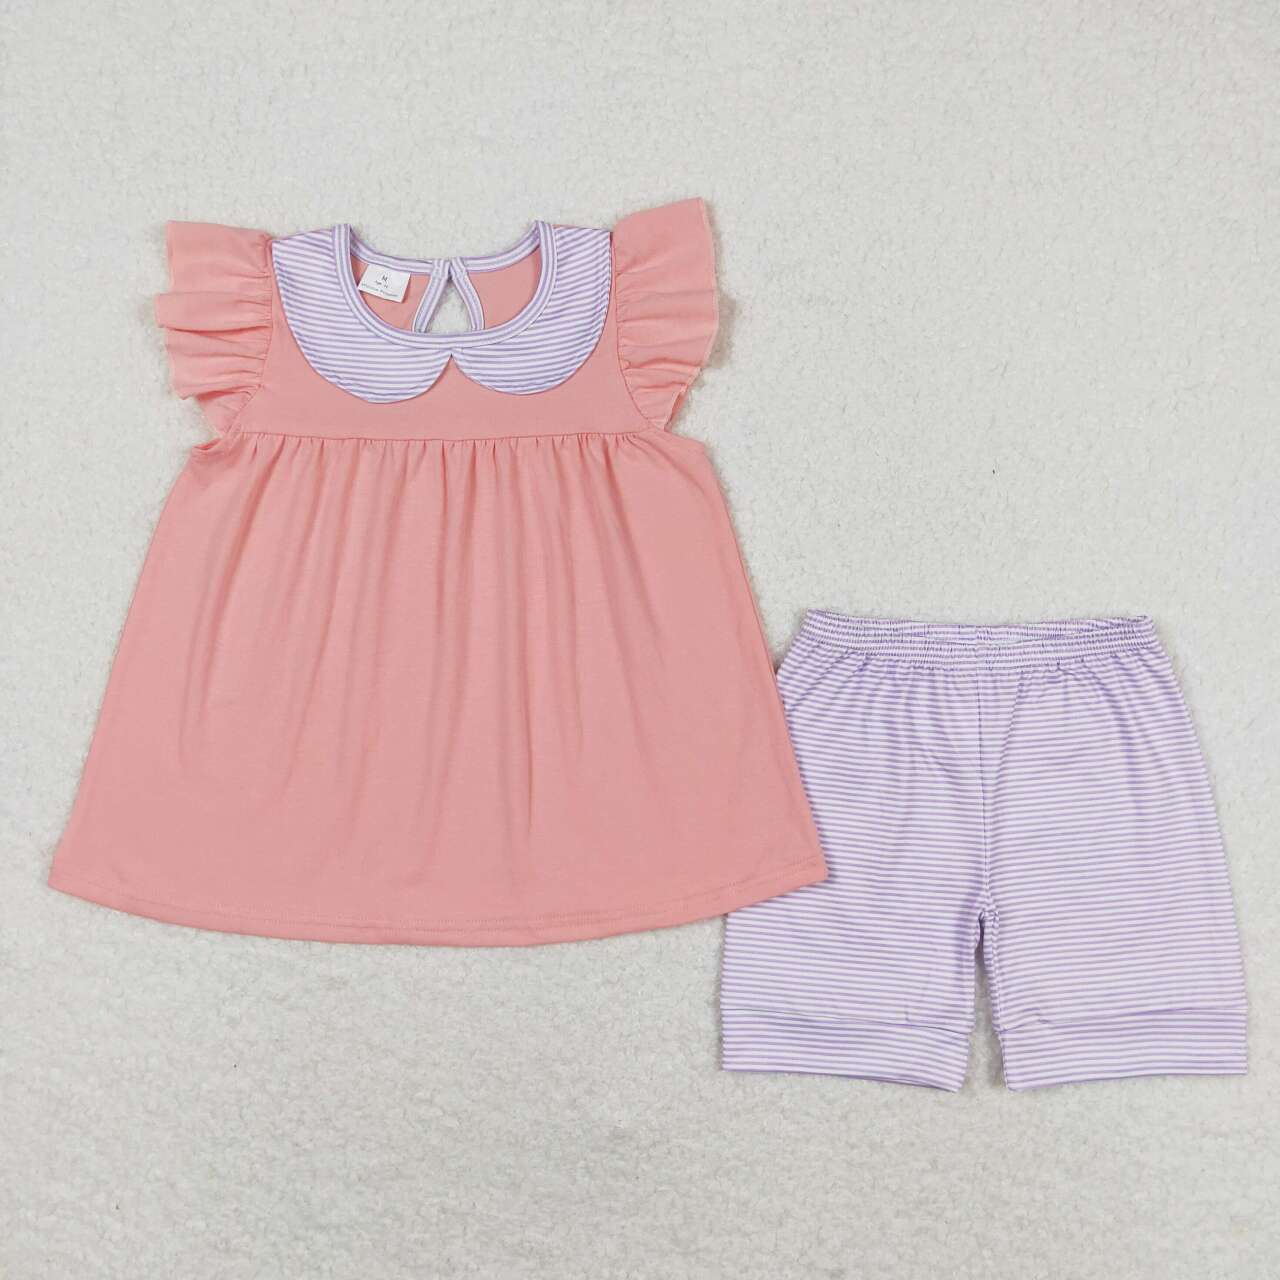 4 Solid Color Top Stripes Shorts Girls Summer Clothes Set Sisters Wear